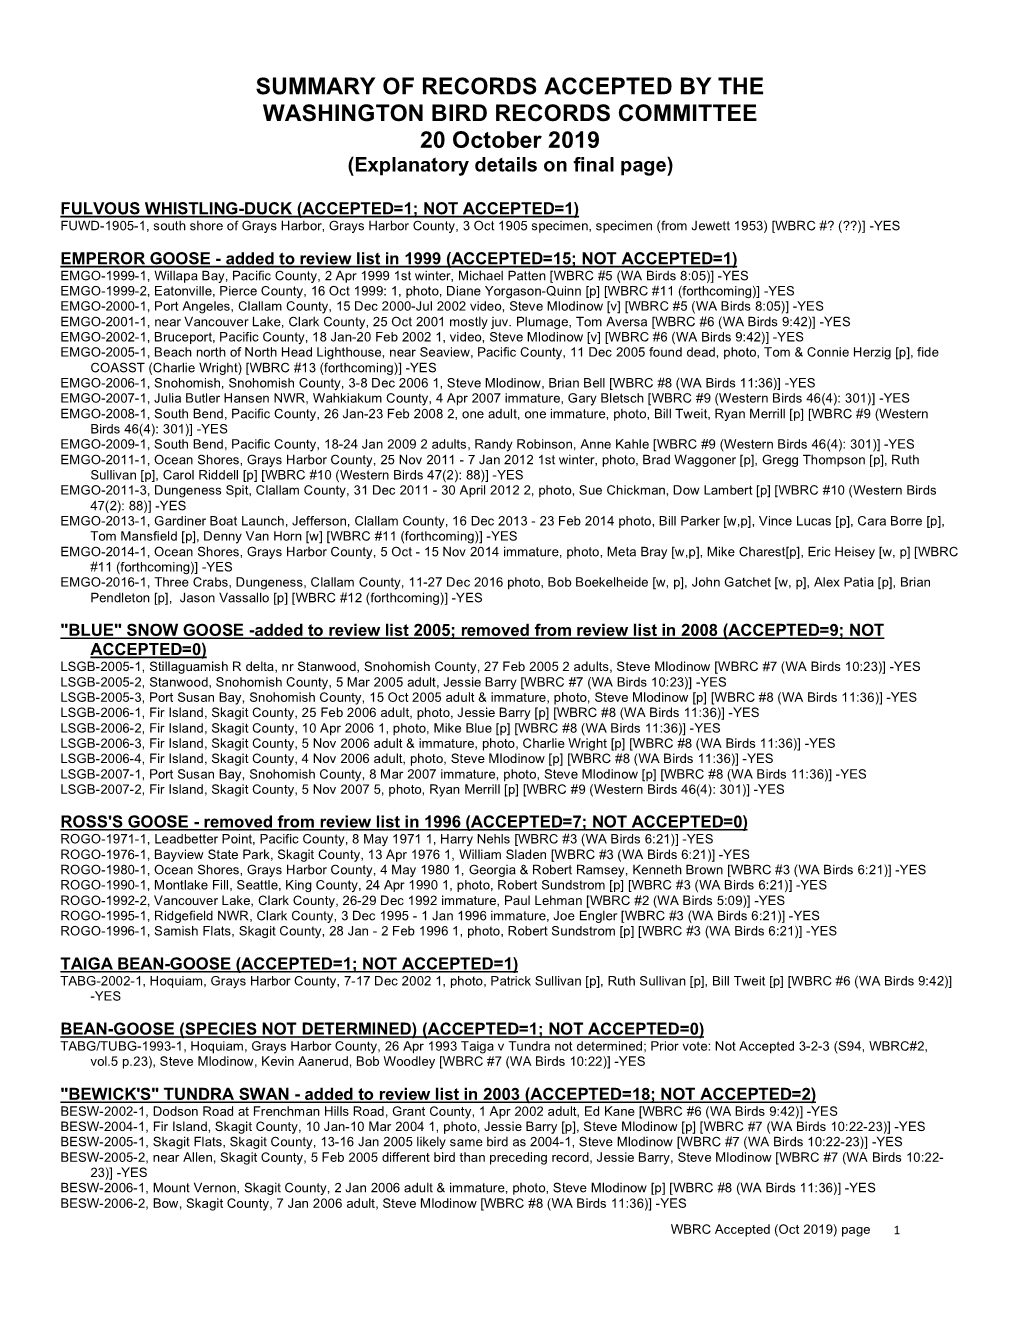 SUMMARY of RECORDS ACCEPTED by the WASHINGTON BIRD RECORDS COMMITTEE 20 October 2019 (Explanatory Details on Final Page)